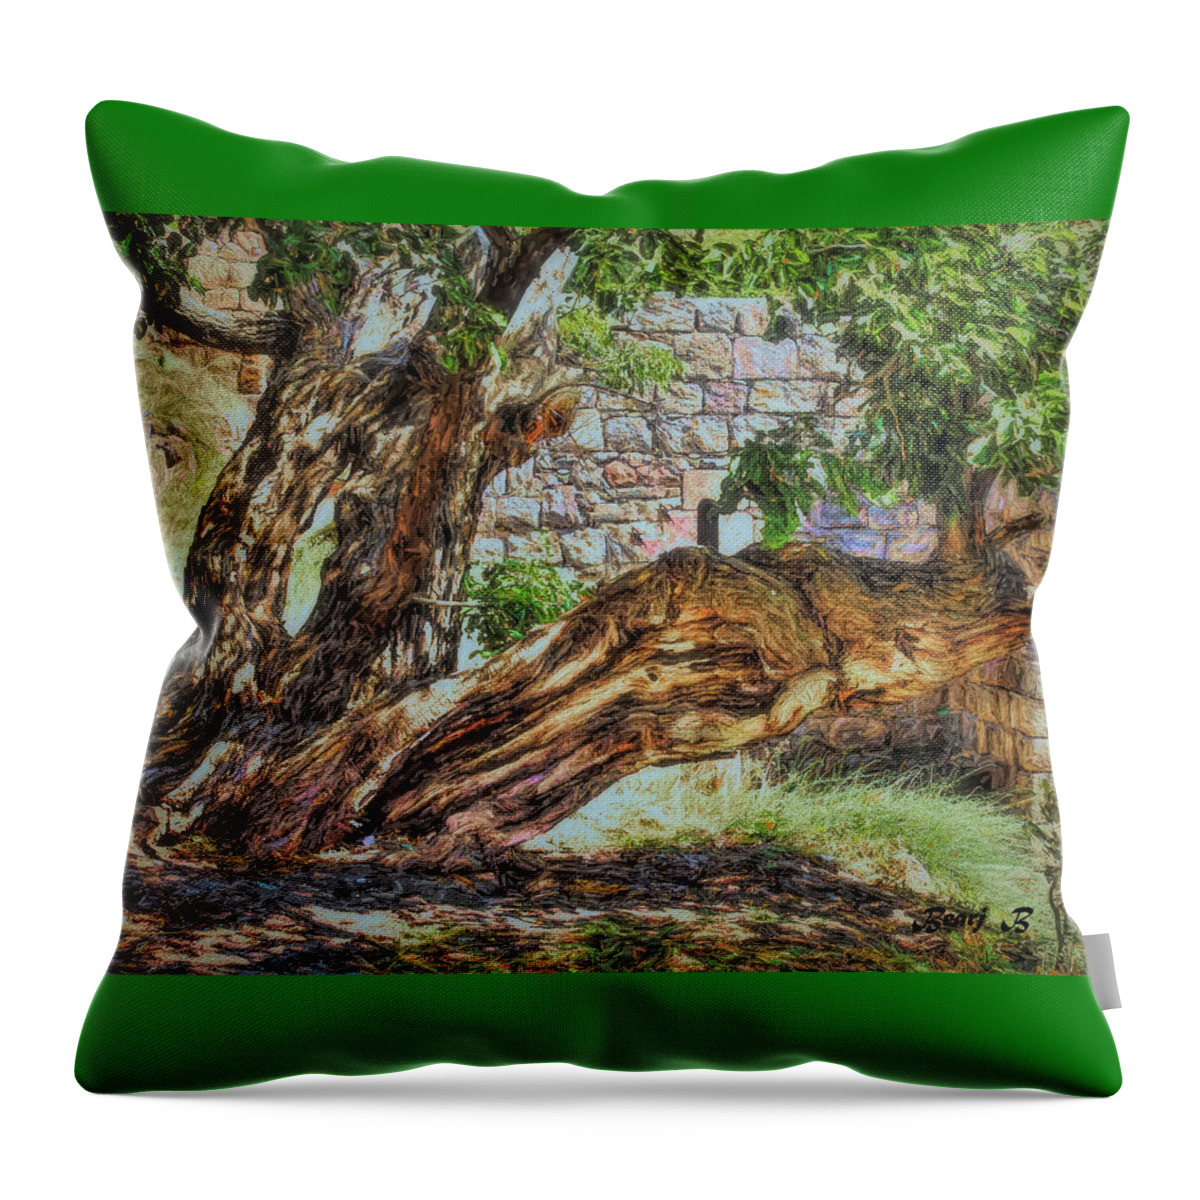 Trees Throw Pillow featuring the photograph The Walnut Tree by Bearj B Photo Art